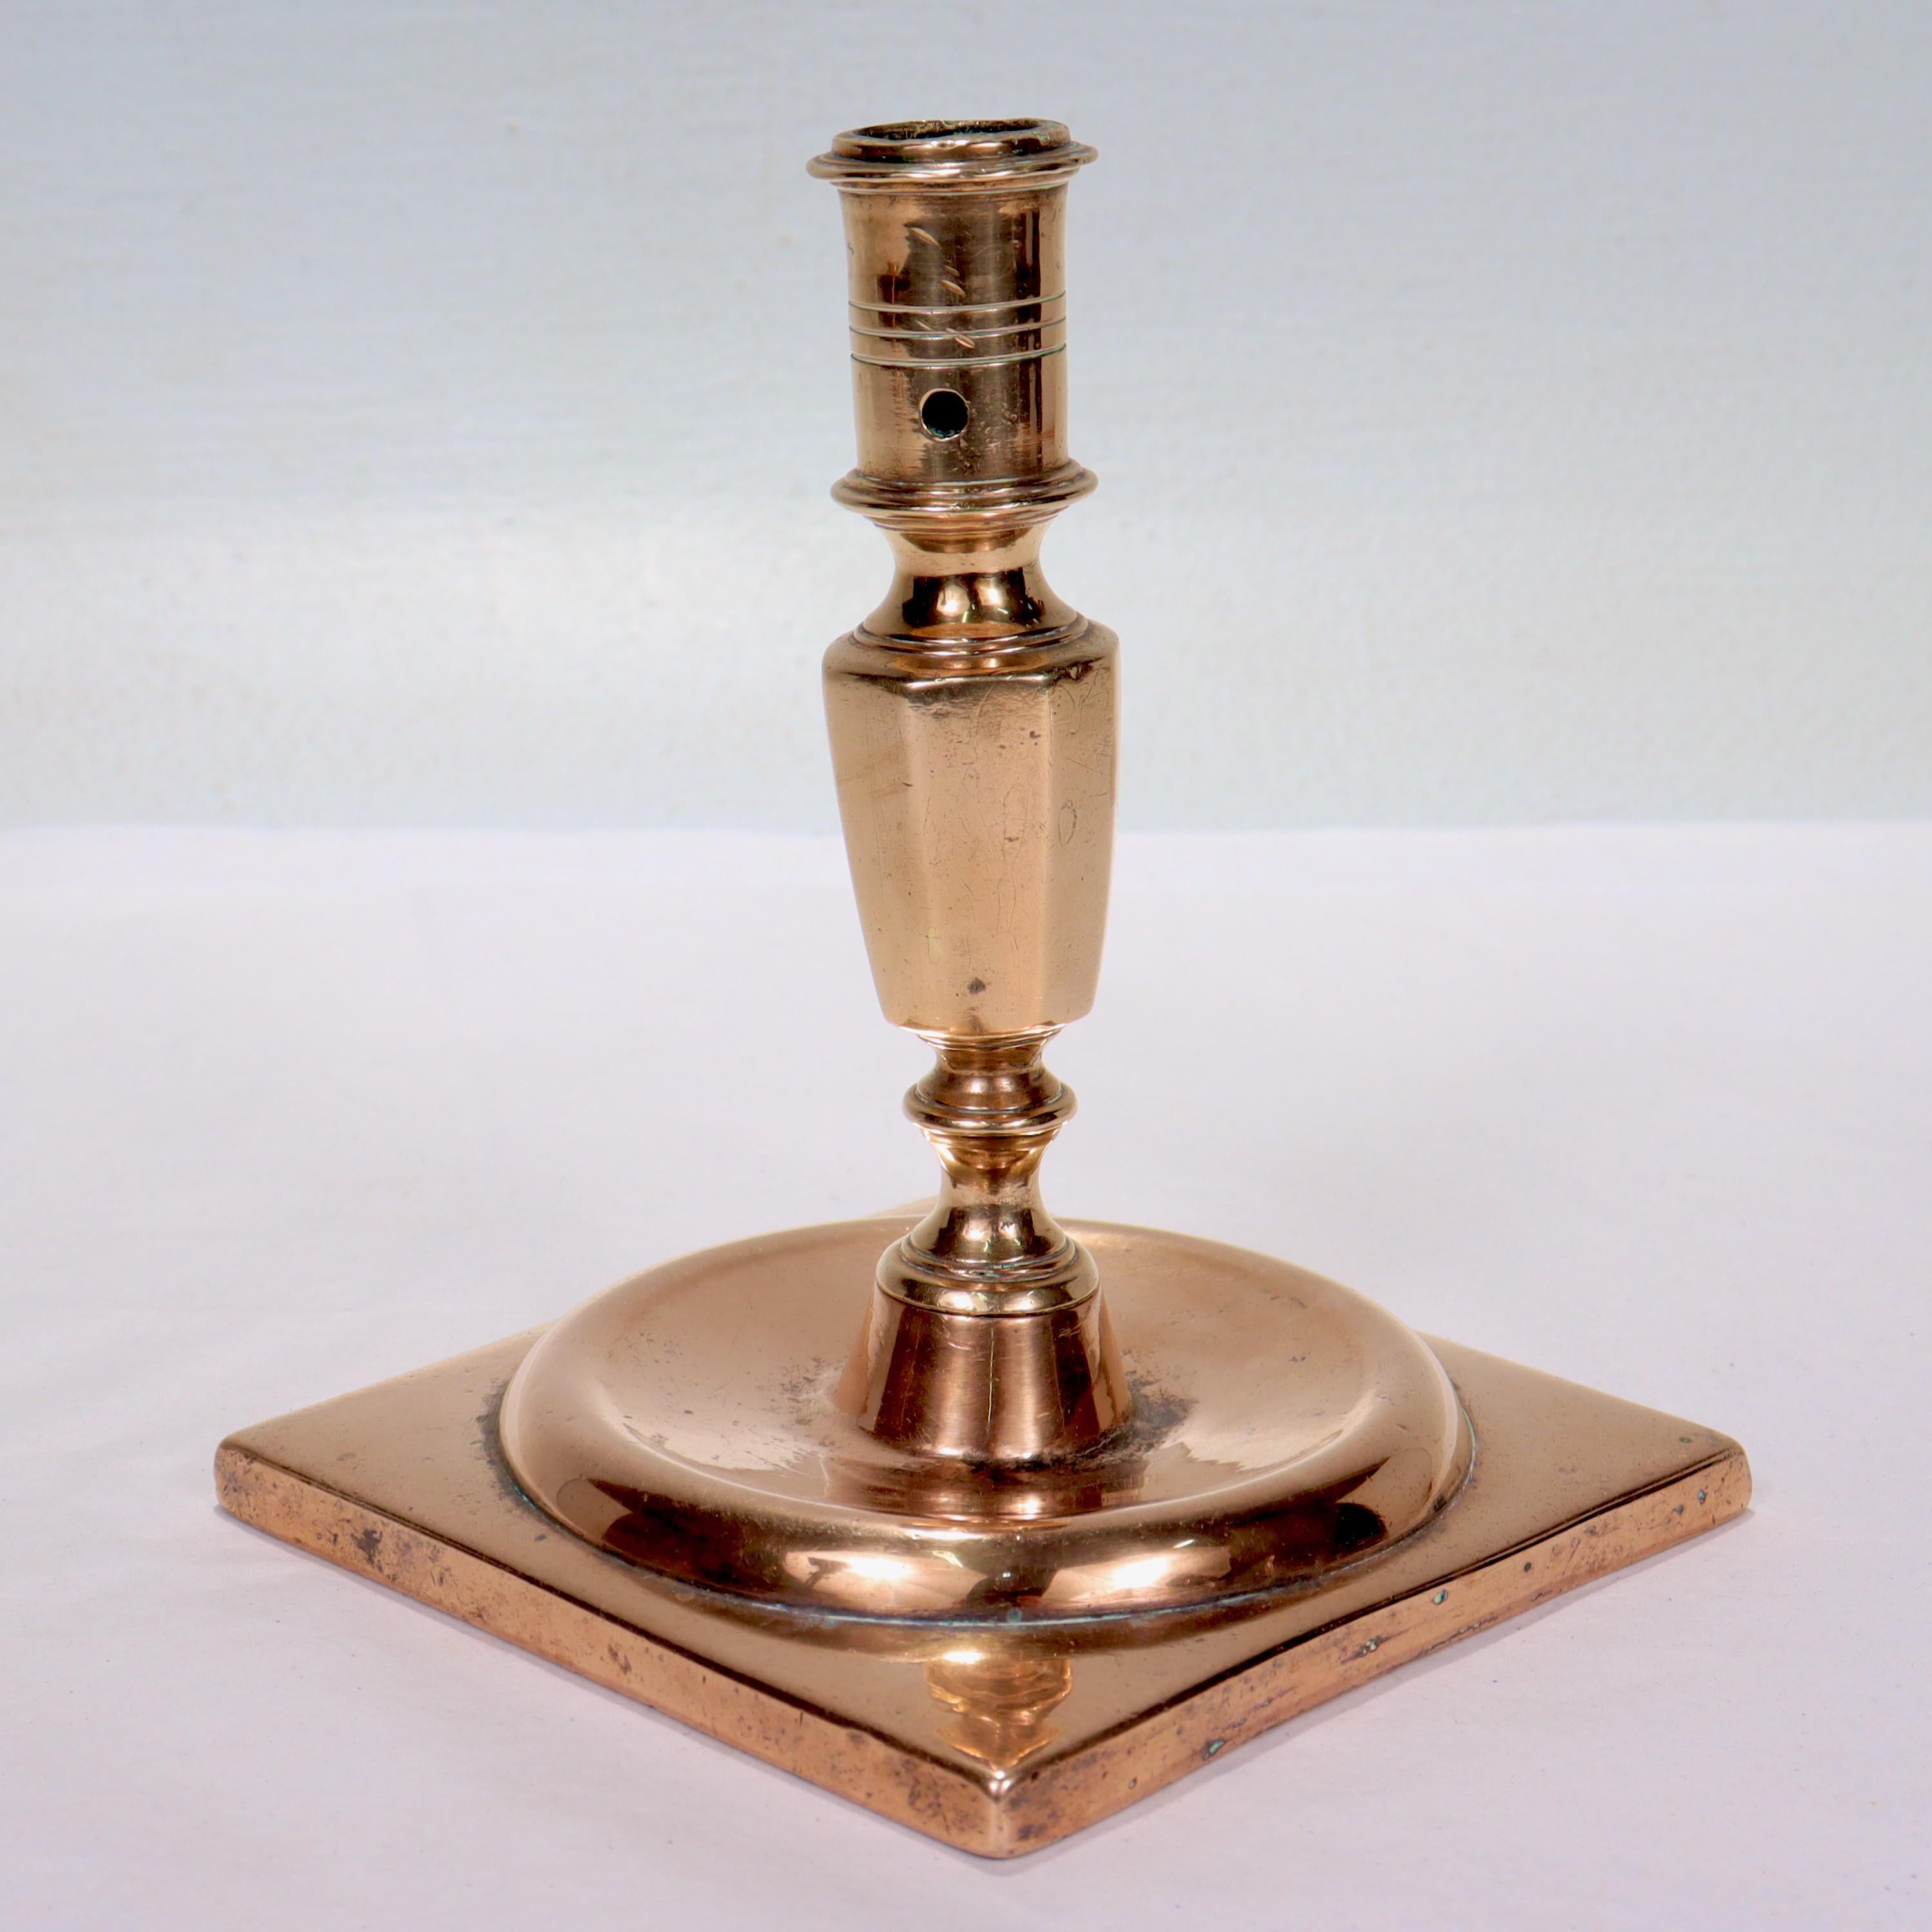 A fine antique bronze candlestick

Dating from the end of the 17th Century.

Likely Dutch or English.

With a wide square base supporting a tapered, faceted stem & cylindrical candle cup with a wax. The candlestick is secured to its base by